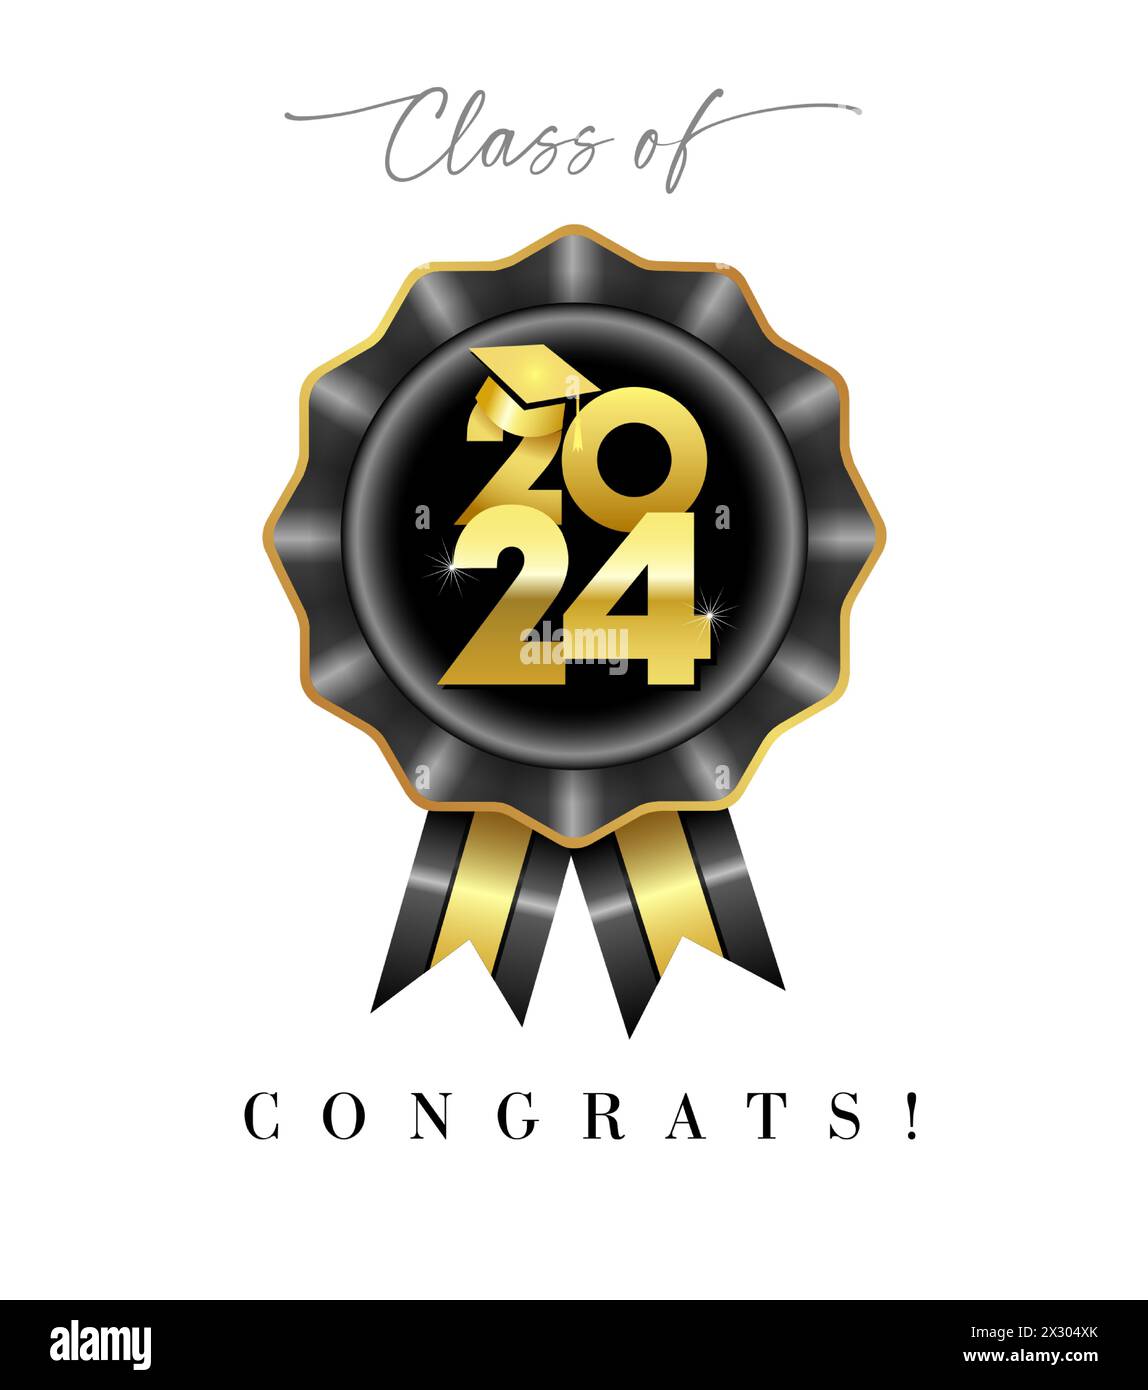 Class of 2024 congrats. Cute graduating banner concept with 3D graphic style black rosette and shiny golden elements. Creative badge. School awards Stock Vector